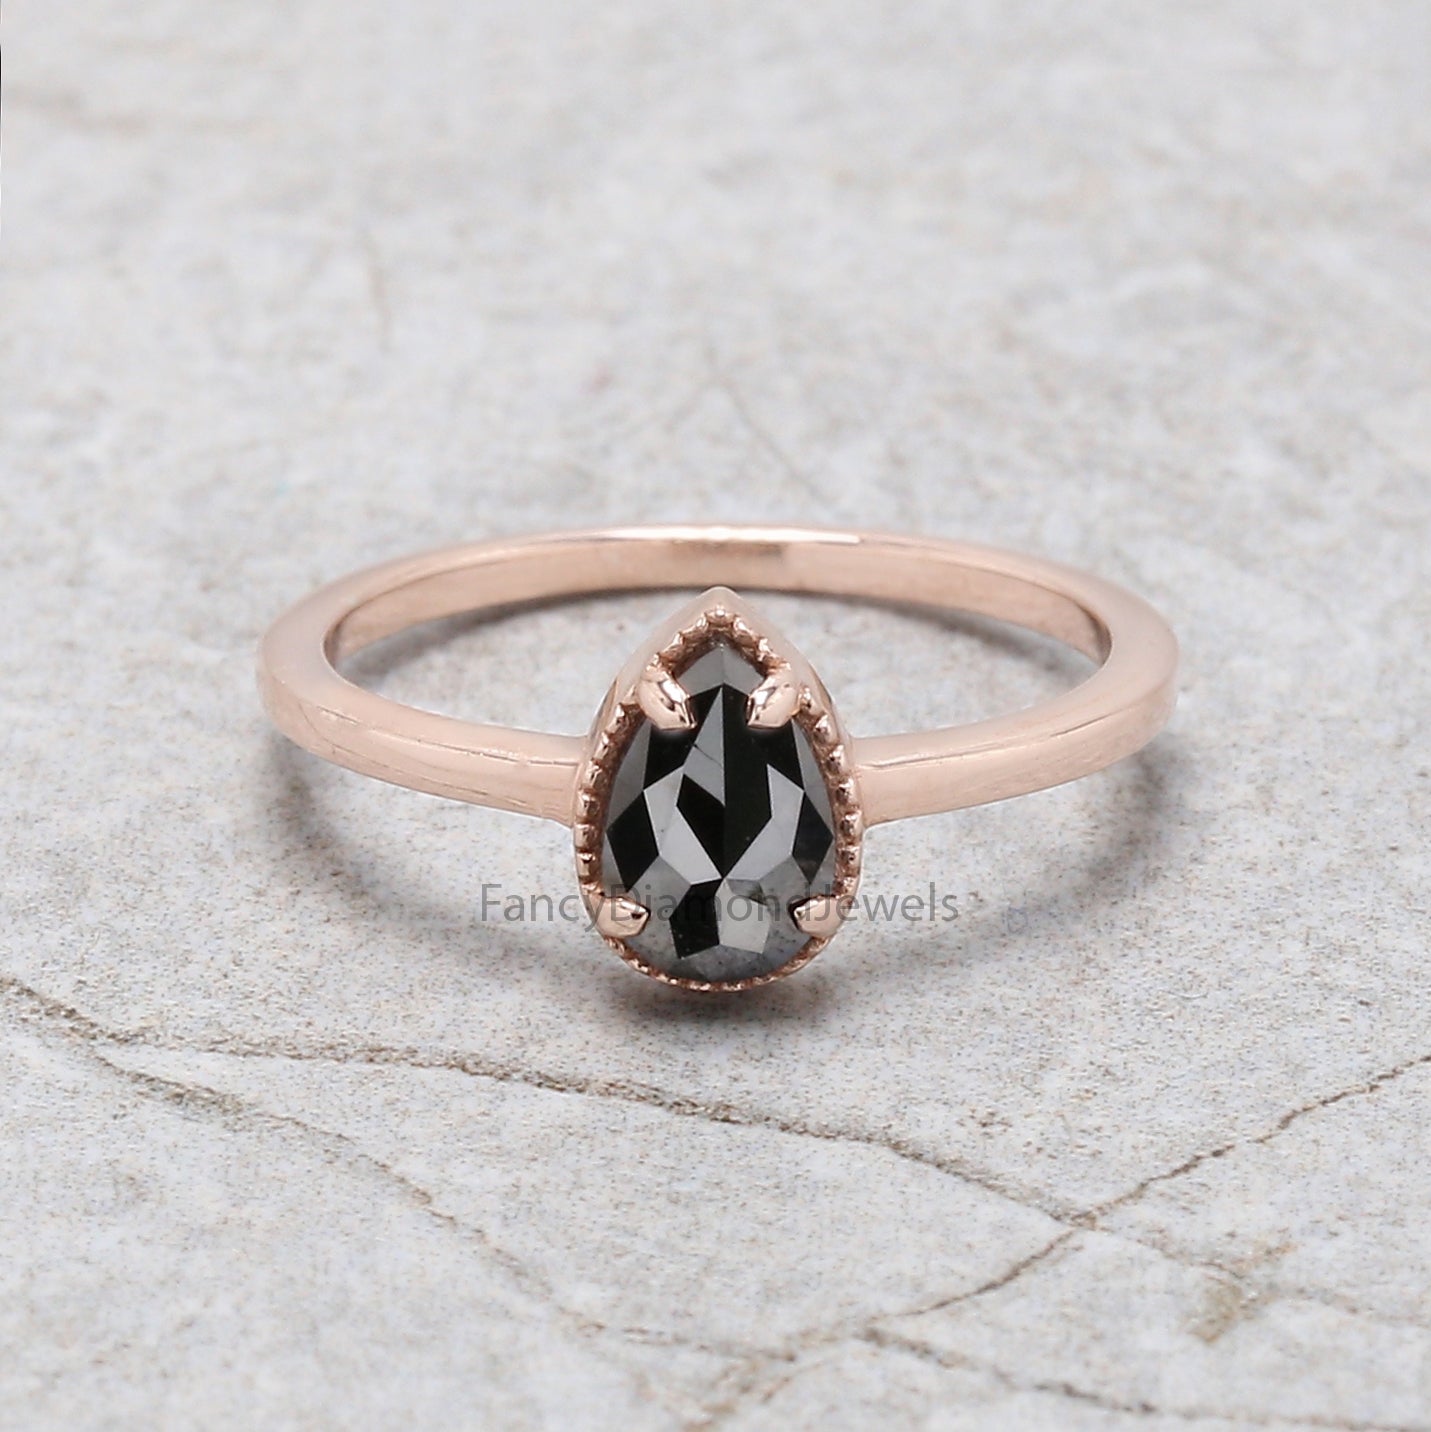 Pear Cut Black Color Diamond Ring 0.61 Ct 7.37 MM Pear Shape Diamond Ring 14K Solid Rose Gold Silver Pear Engagement Ring Gift For Her QN2270